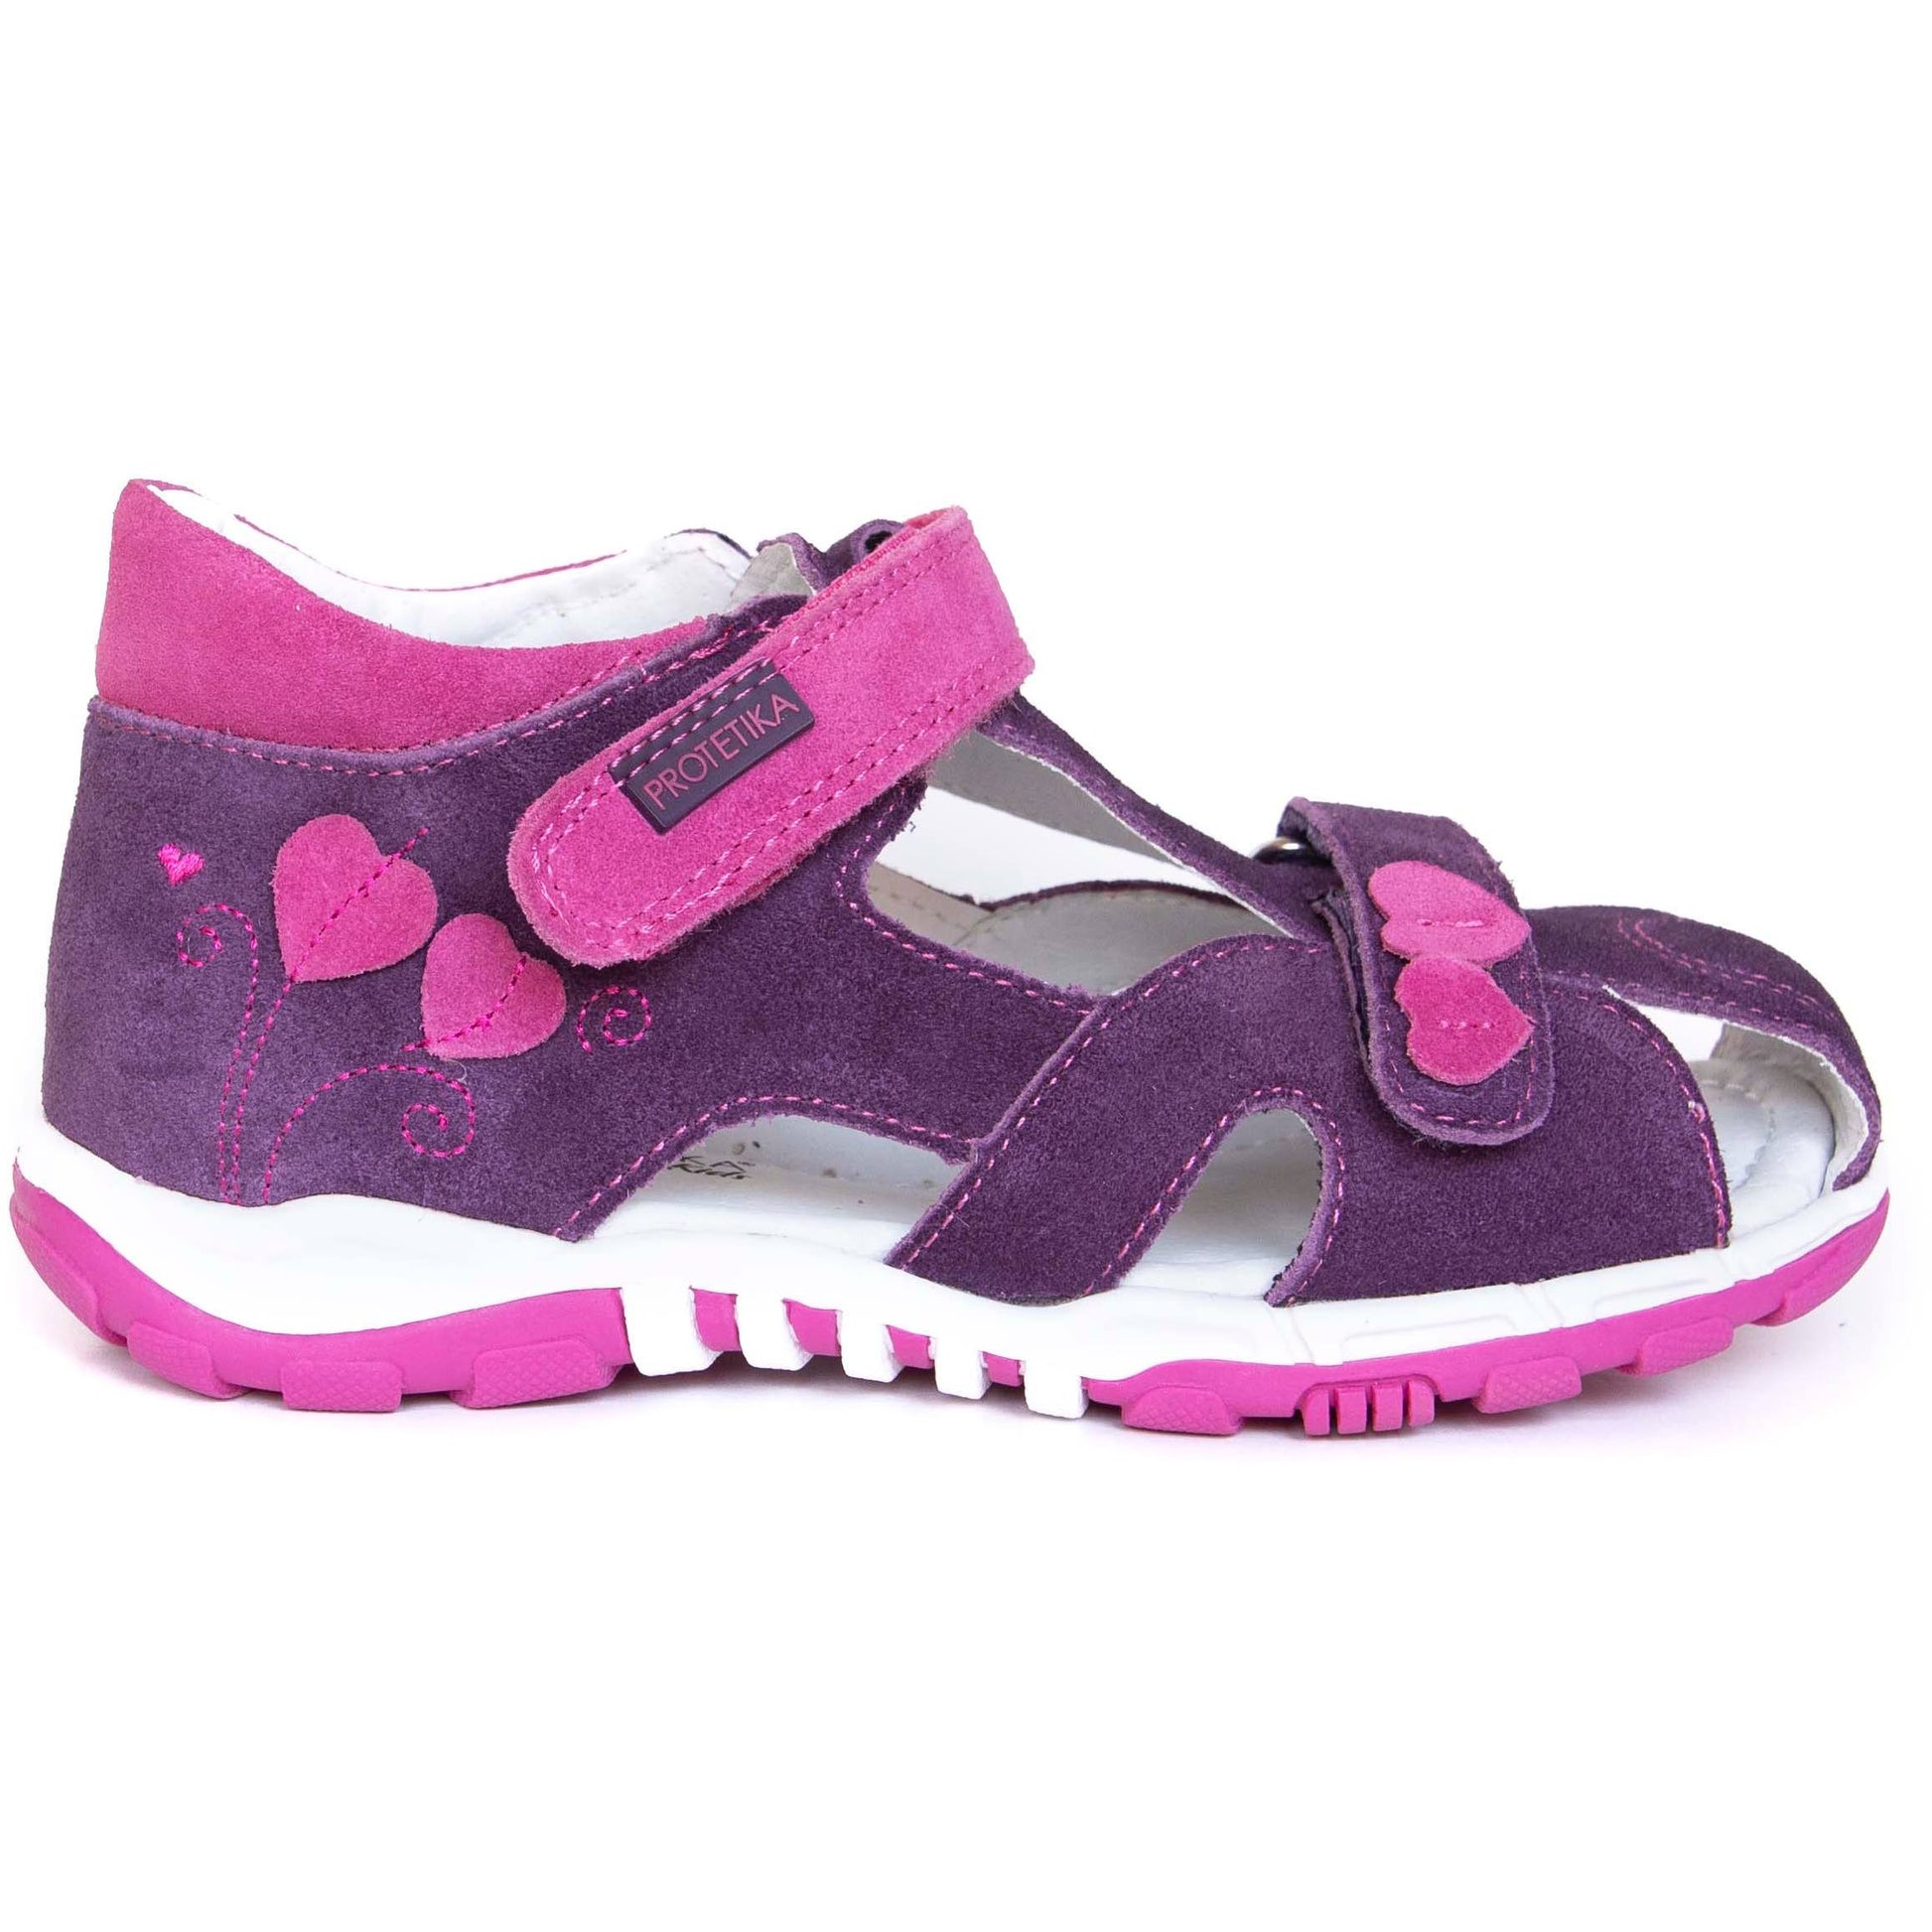 Arch support sandals for older girls and solid heel counter, with a cushioned heel collar to protect Achilles tendon.